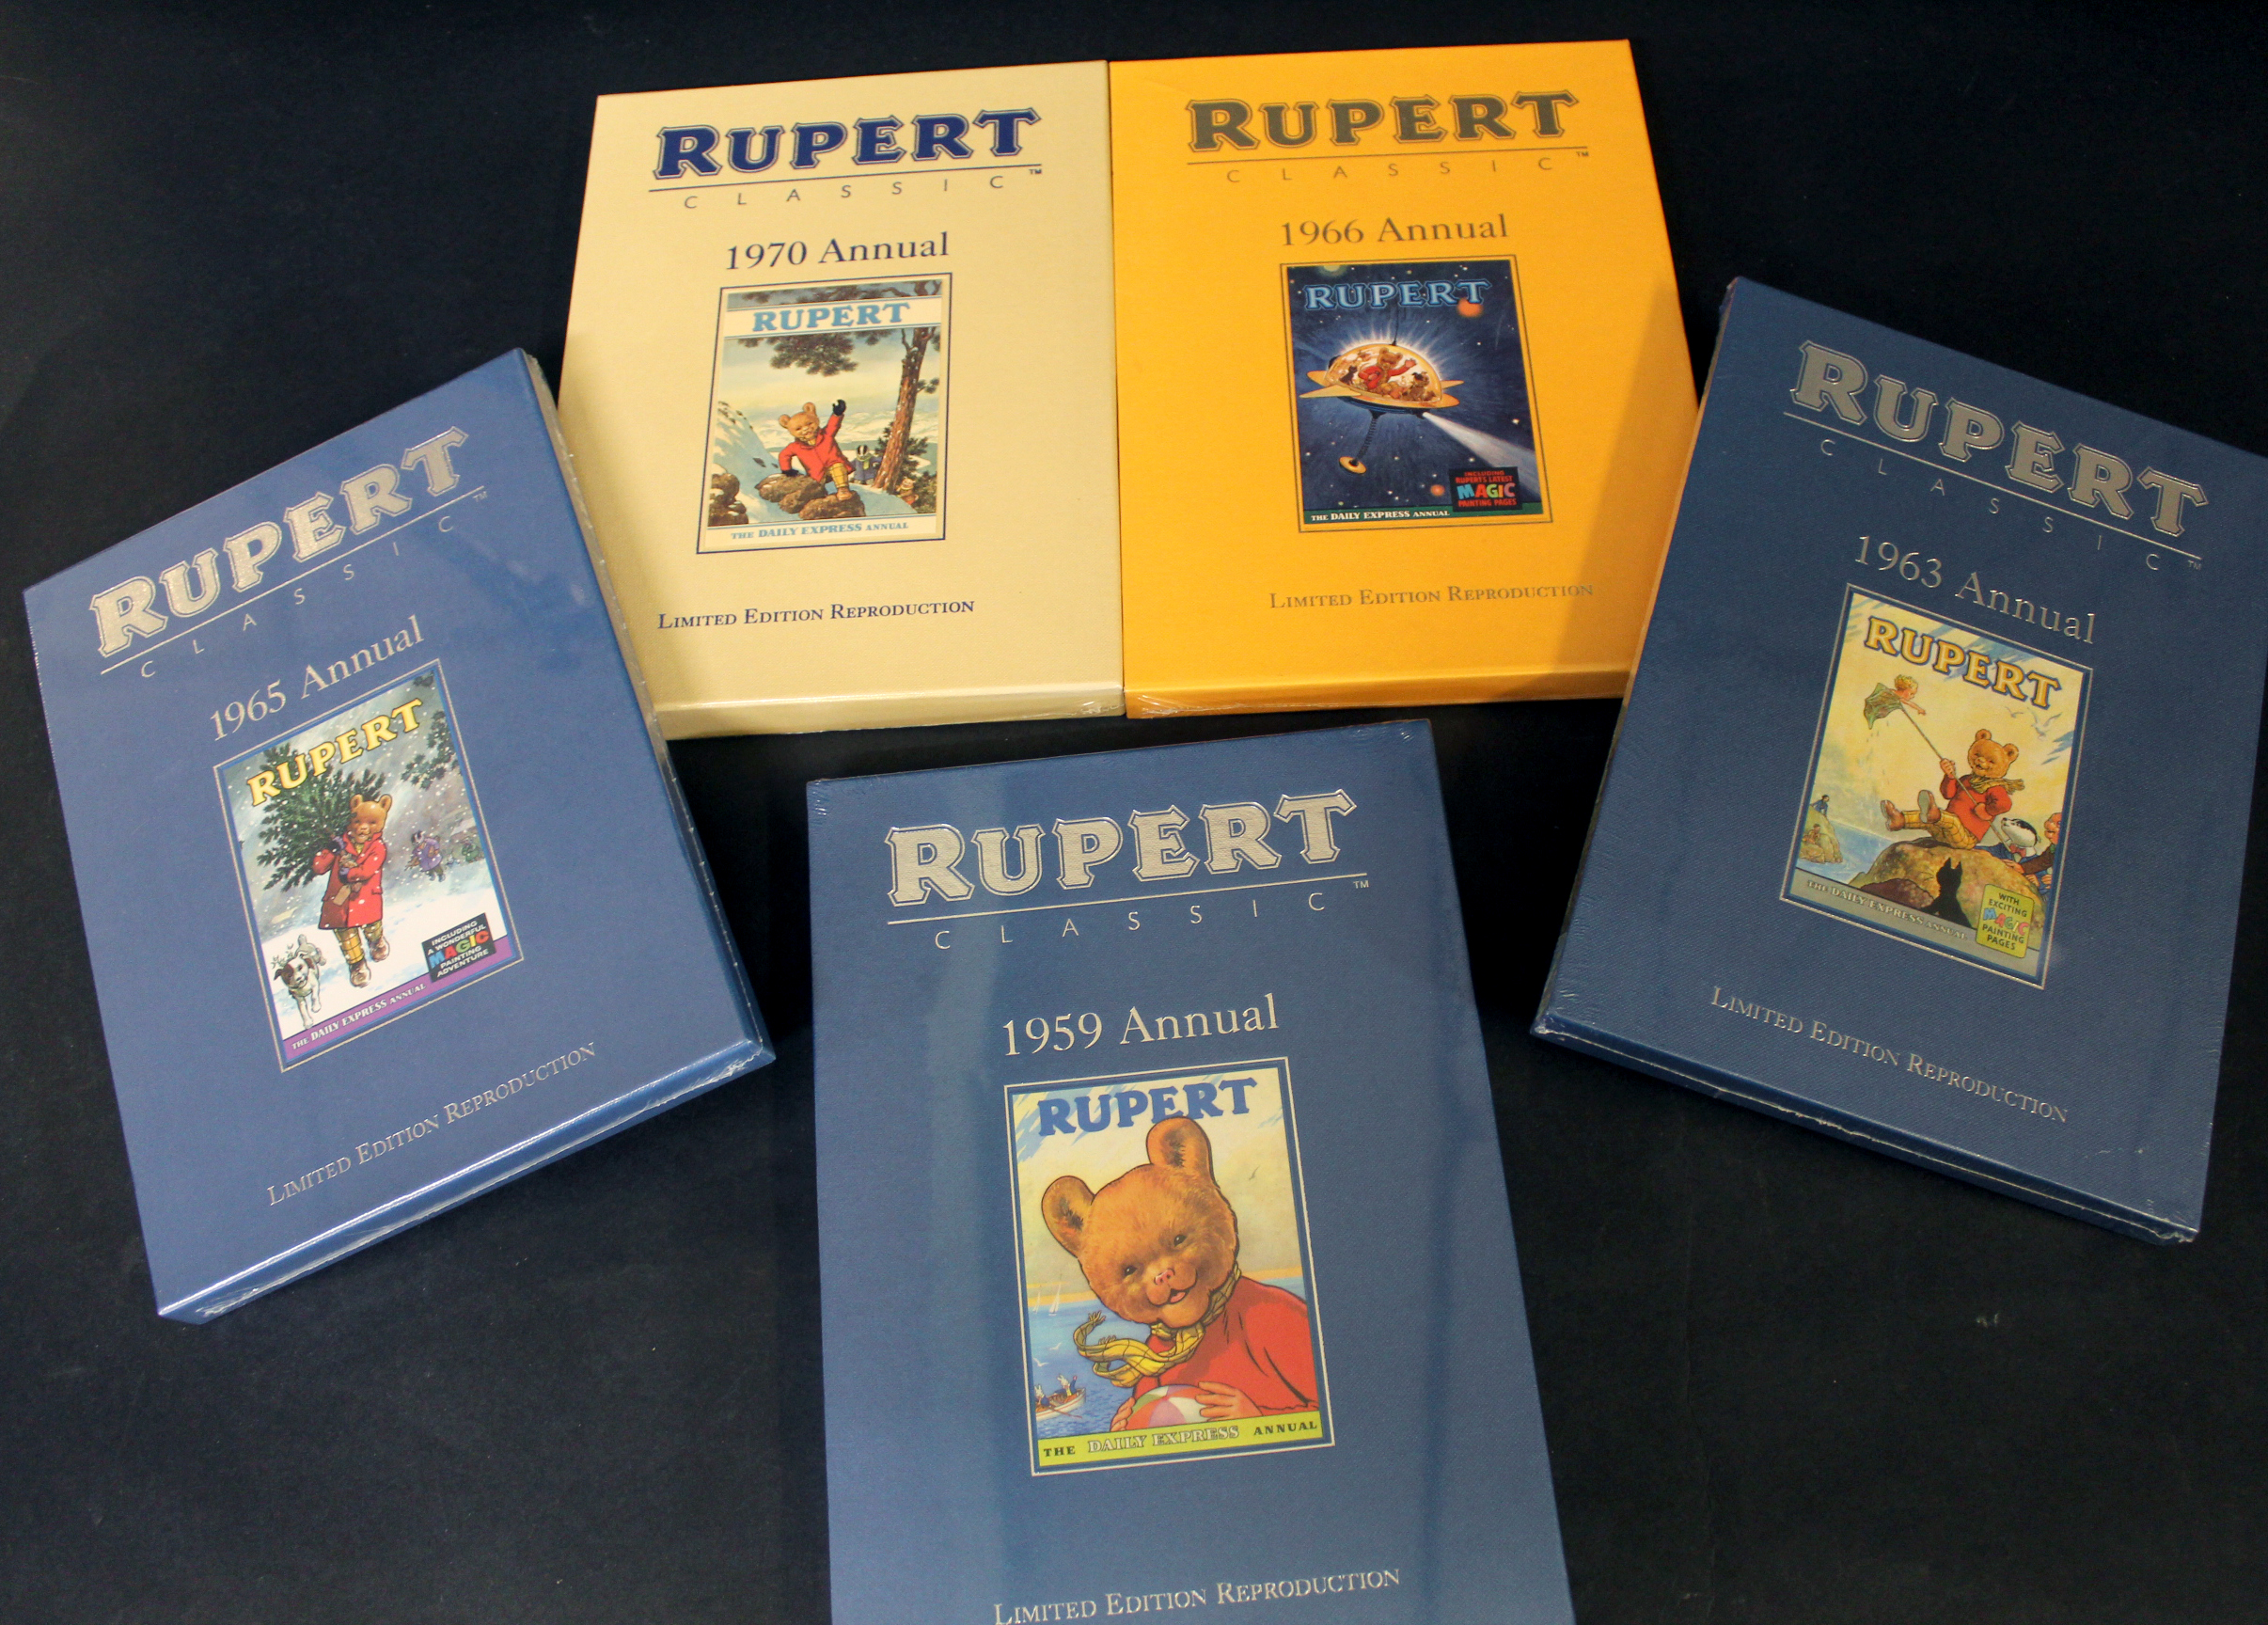 RUPERT, facsimile editions of 1959, 1963, 1965-66, 1970 annuals, all unopened with original shrink